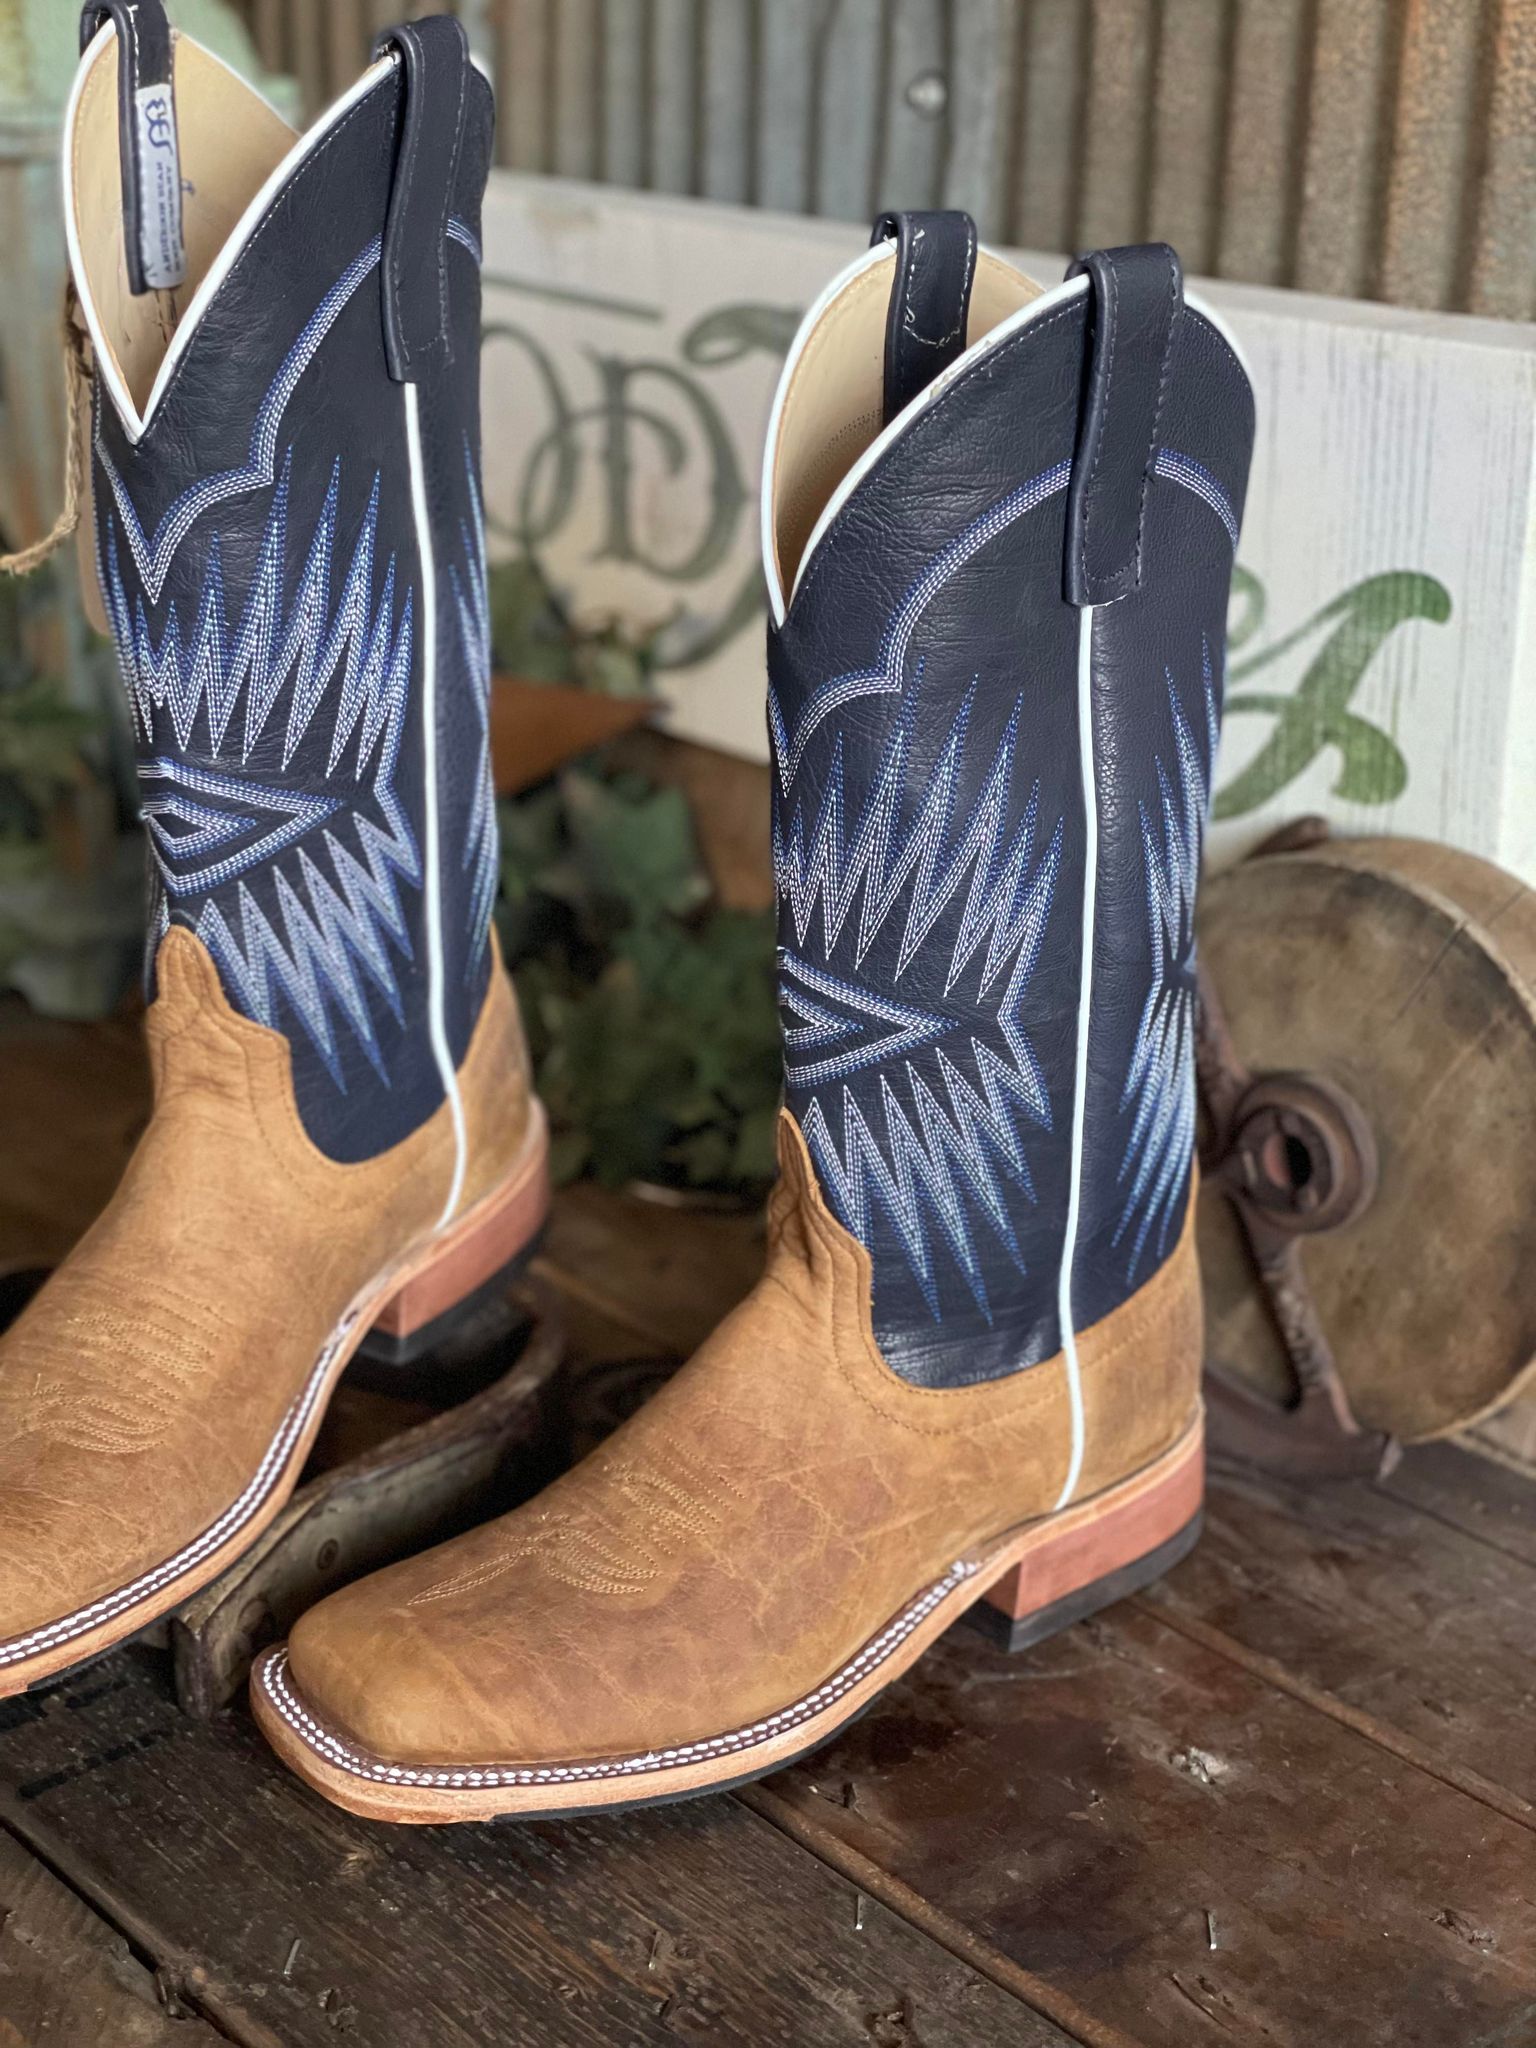 AB Women's Natural Brahma Bison Square Toe Boot-Women's Boots-Anderson Bean-Lucky J Boots & More, Women's, Men's, & Kids Western Store Located in Carthage, MO